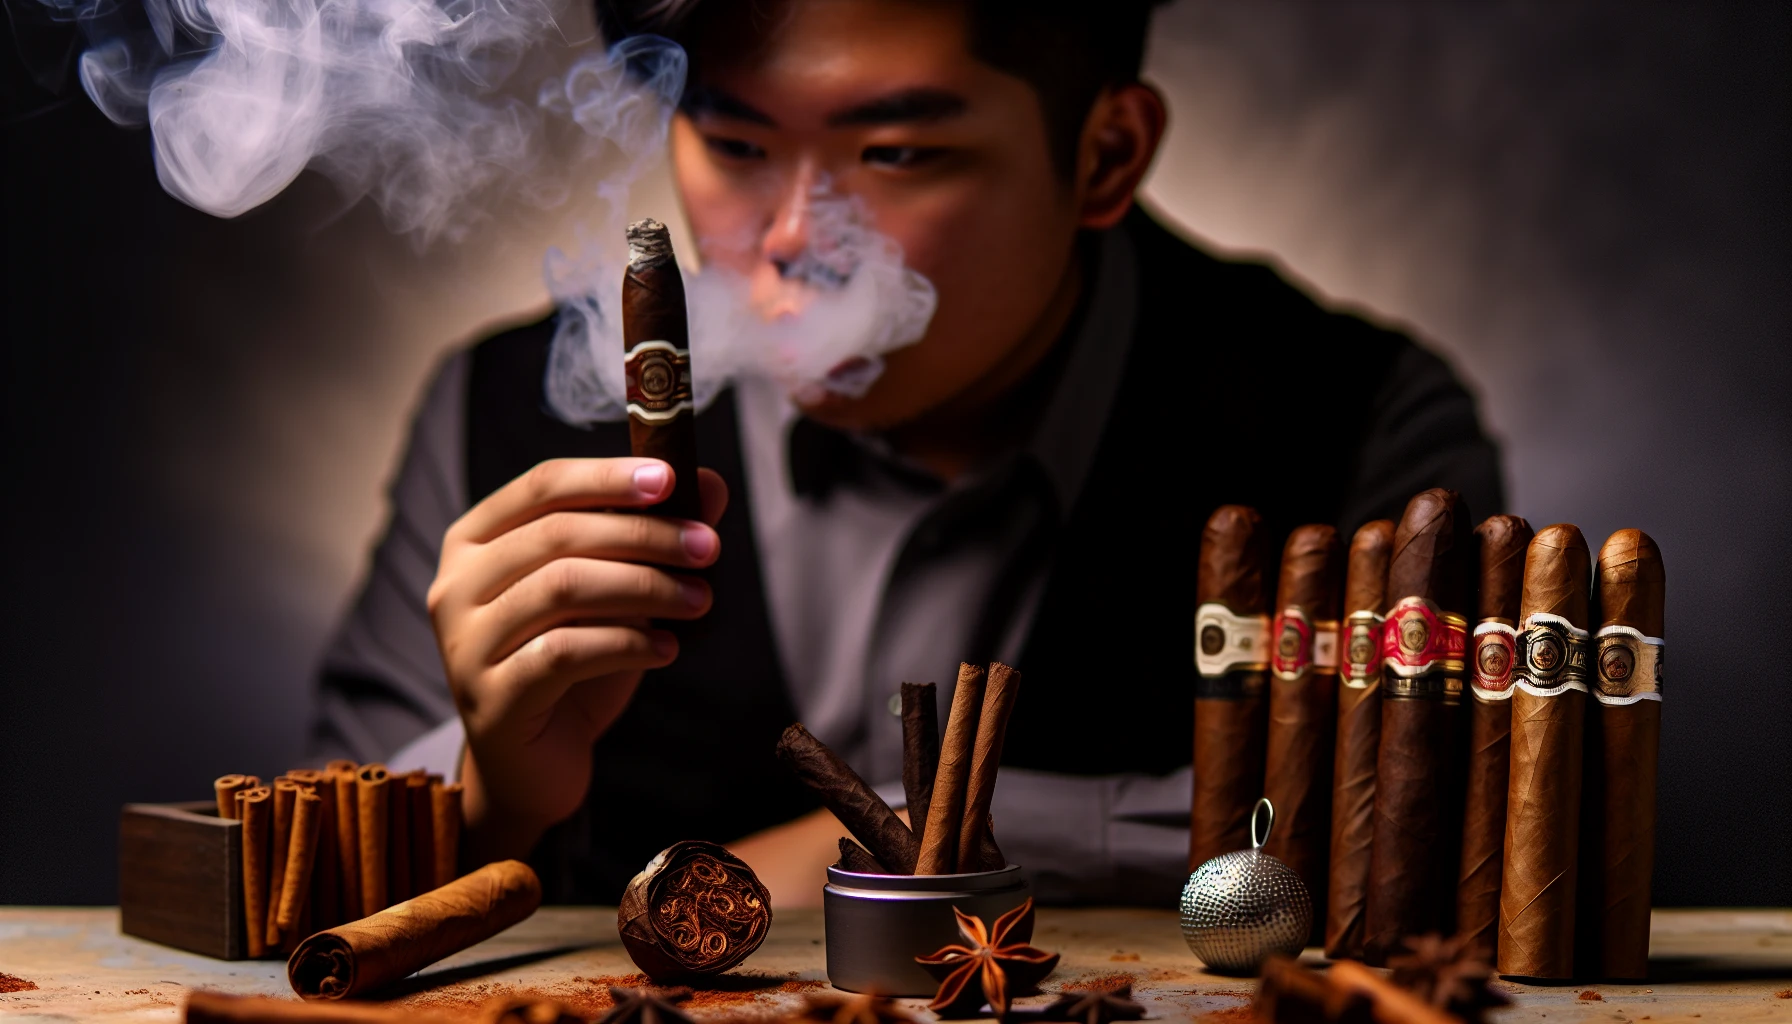 A person holding a Bellas Artes Maduro cigar, surrounded by sweet spices and rich aromas, depicting the flavor journey experienced with the cigar